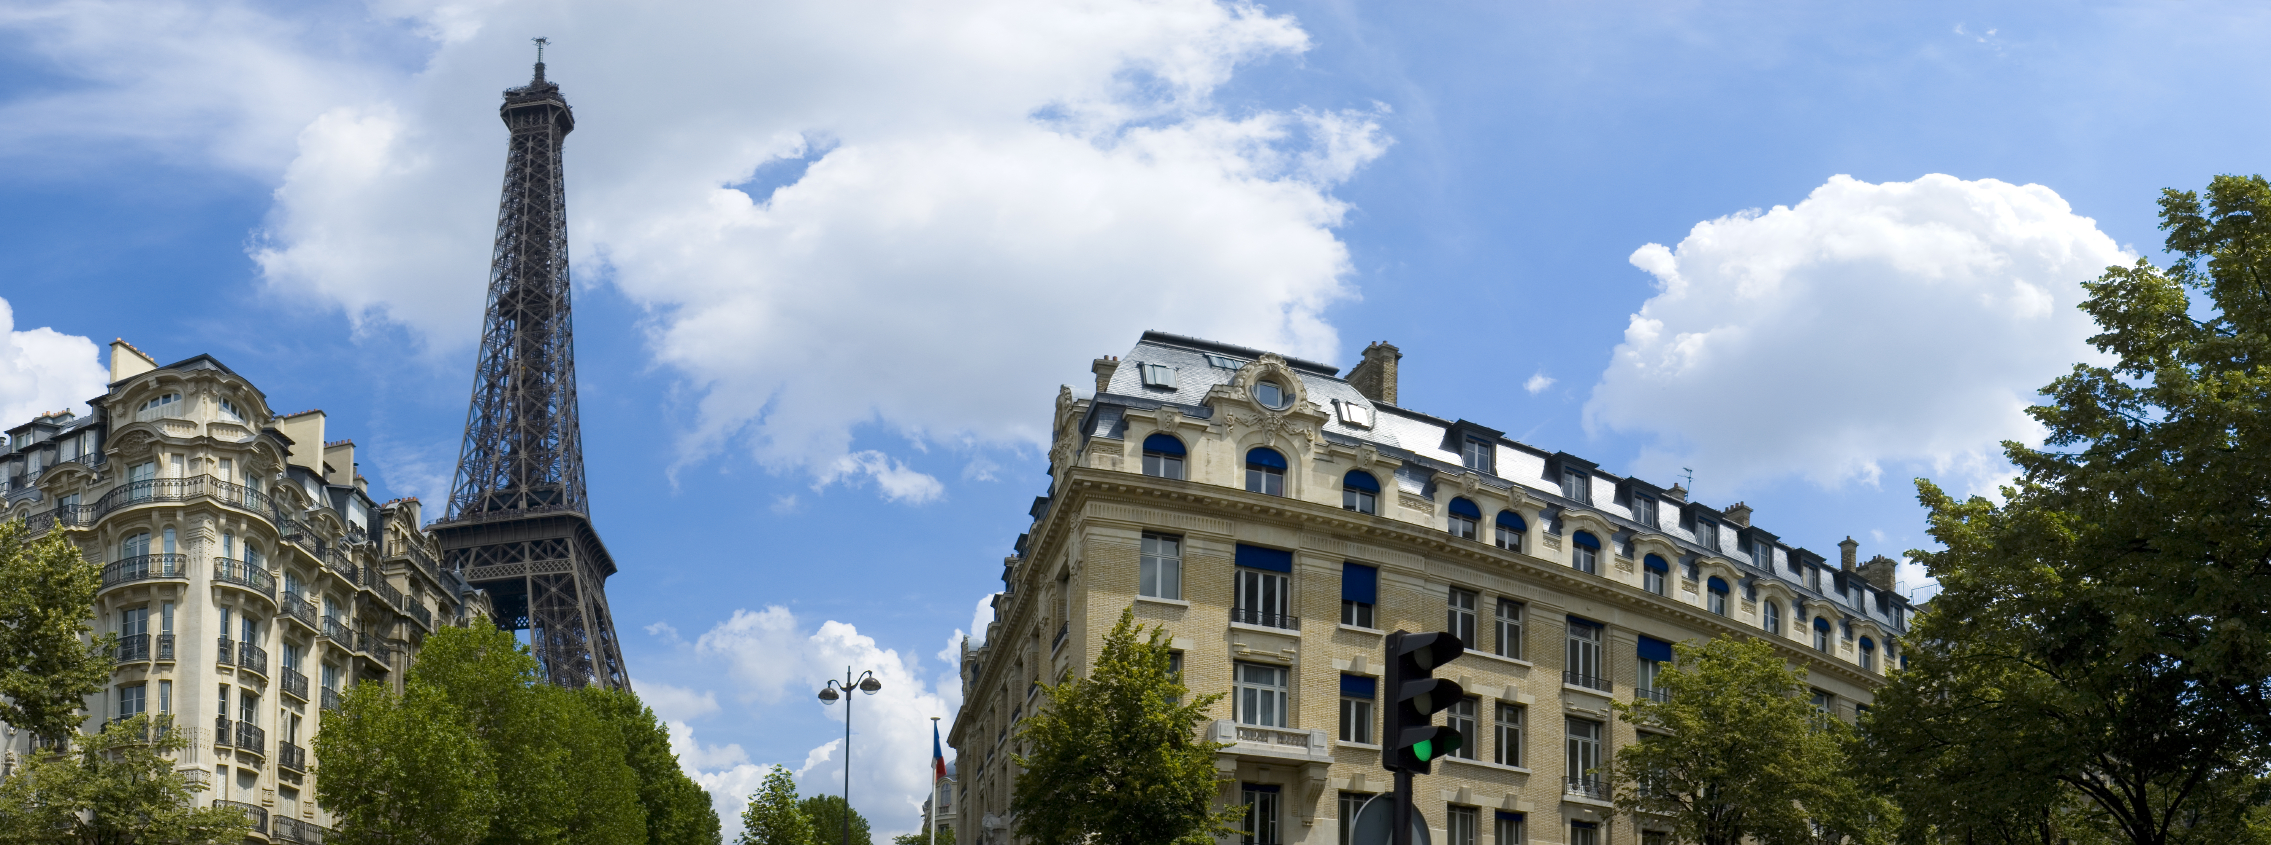 Prime Paris property insights released by Home Hunts